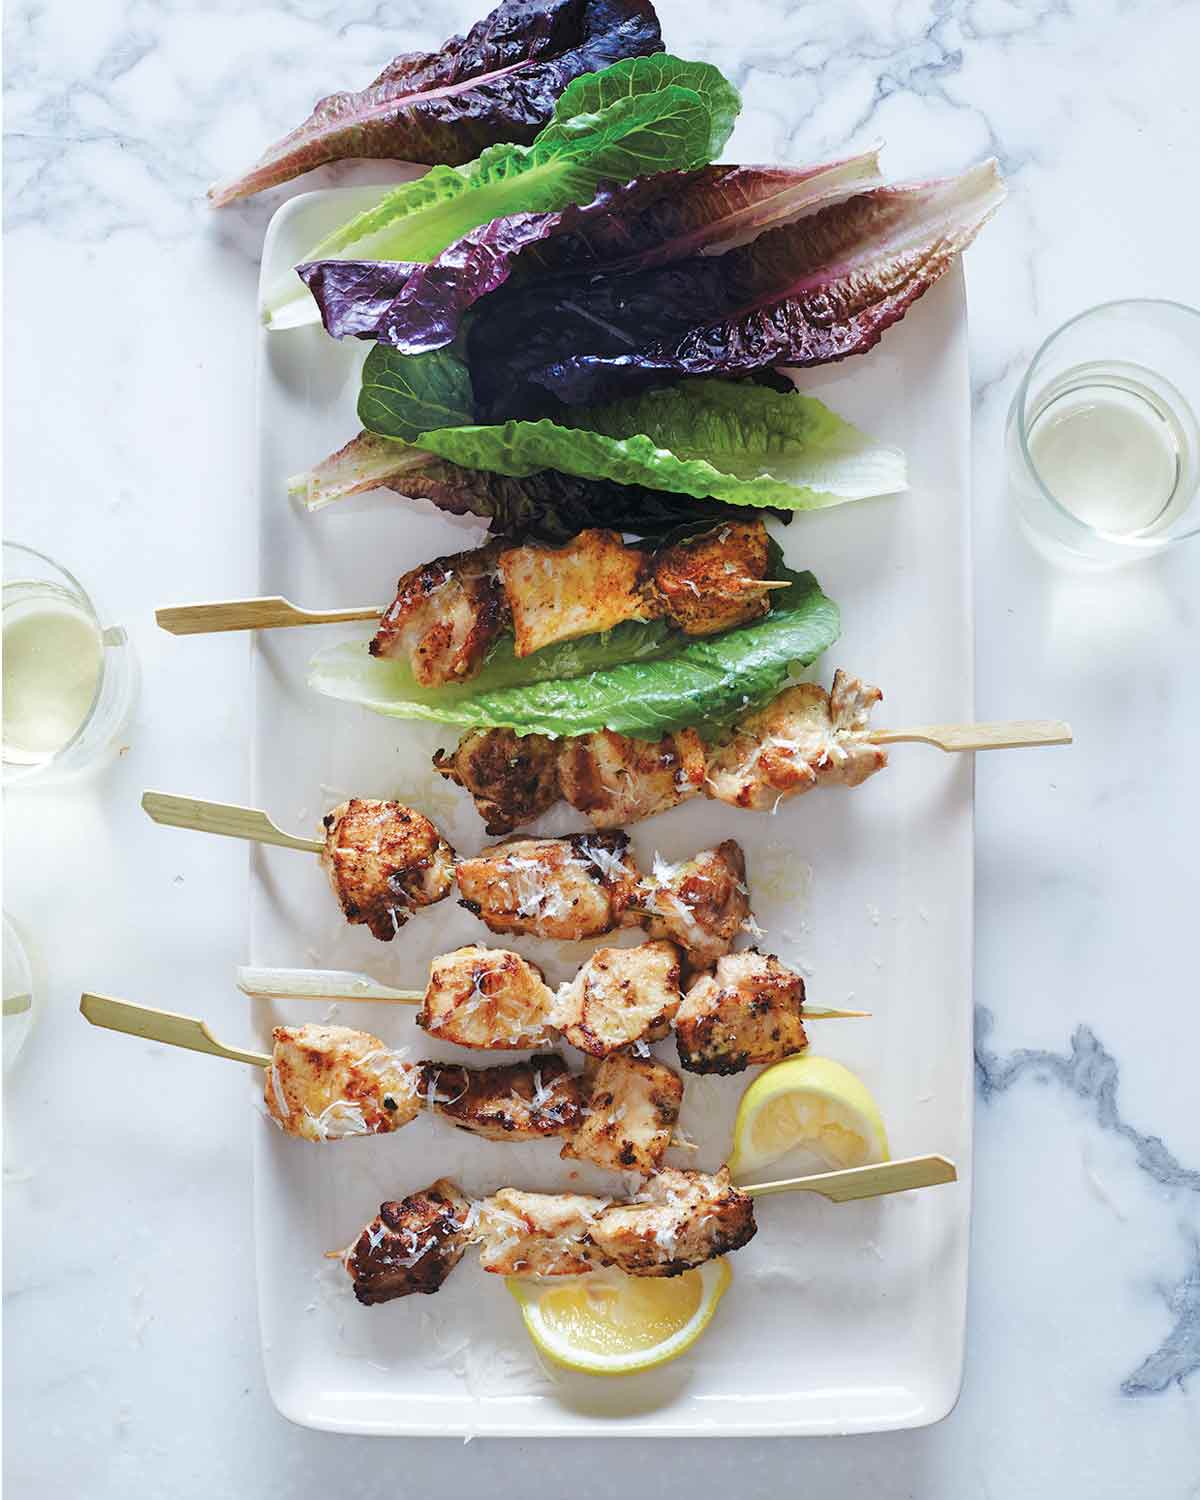 Six chicken caesar salad skewers on a white plate with leaves of red and green romaine and two lemon wedges.